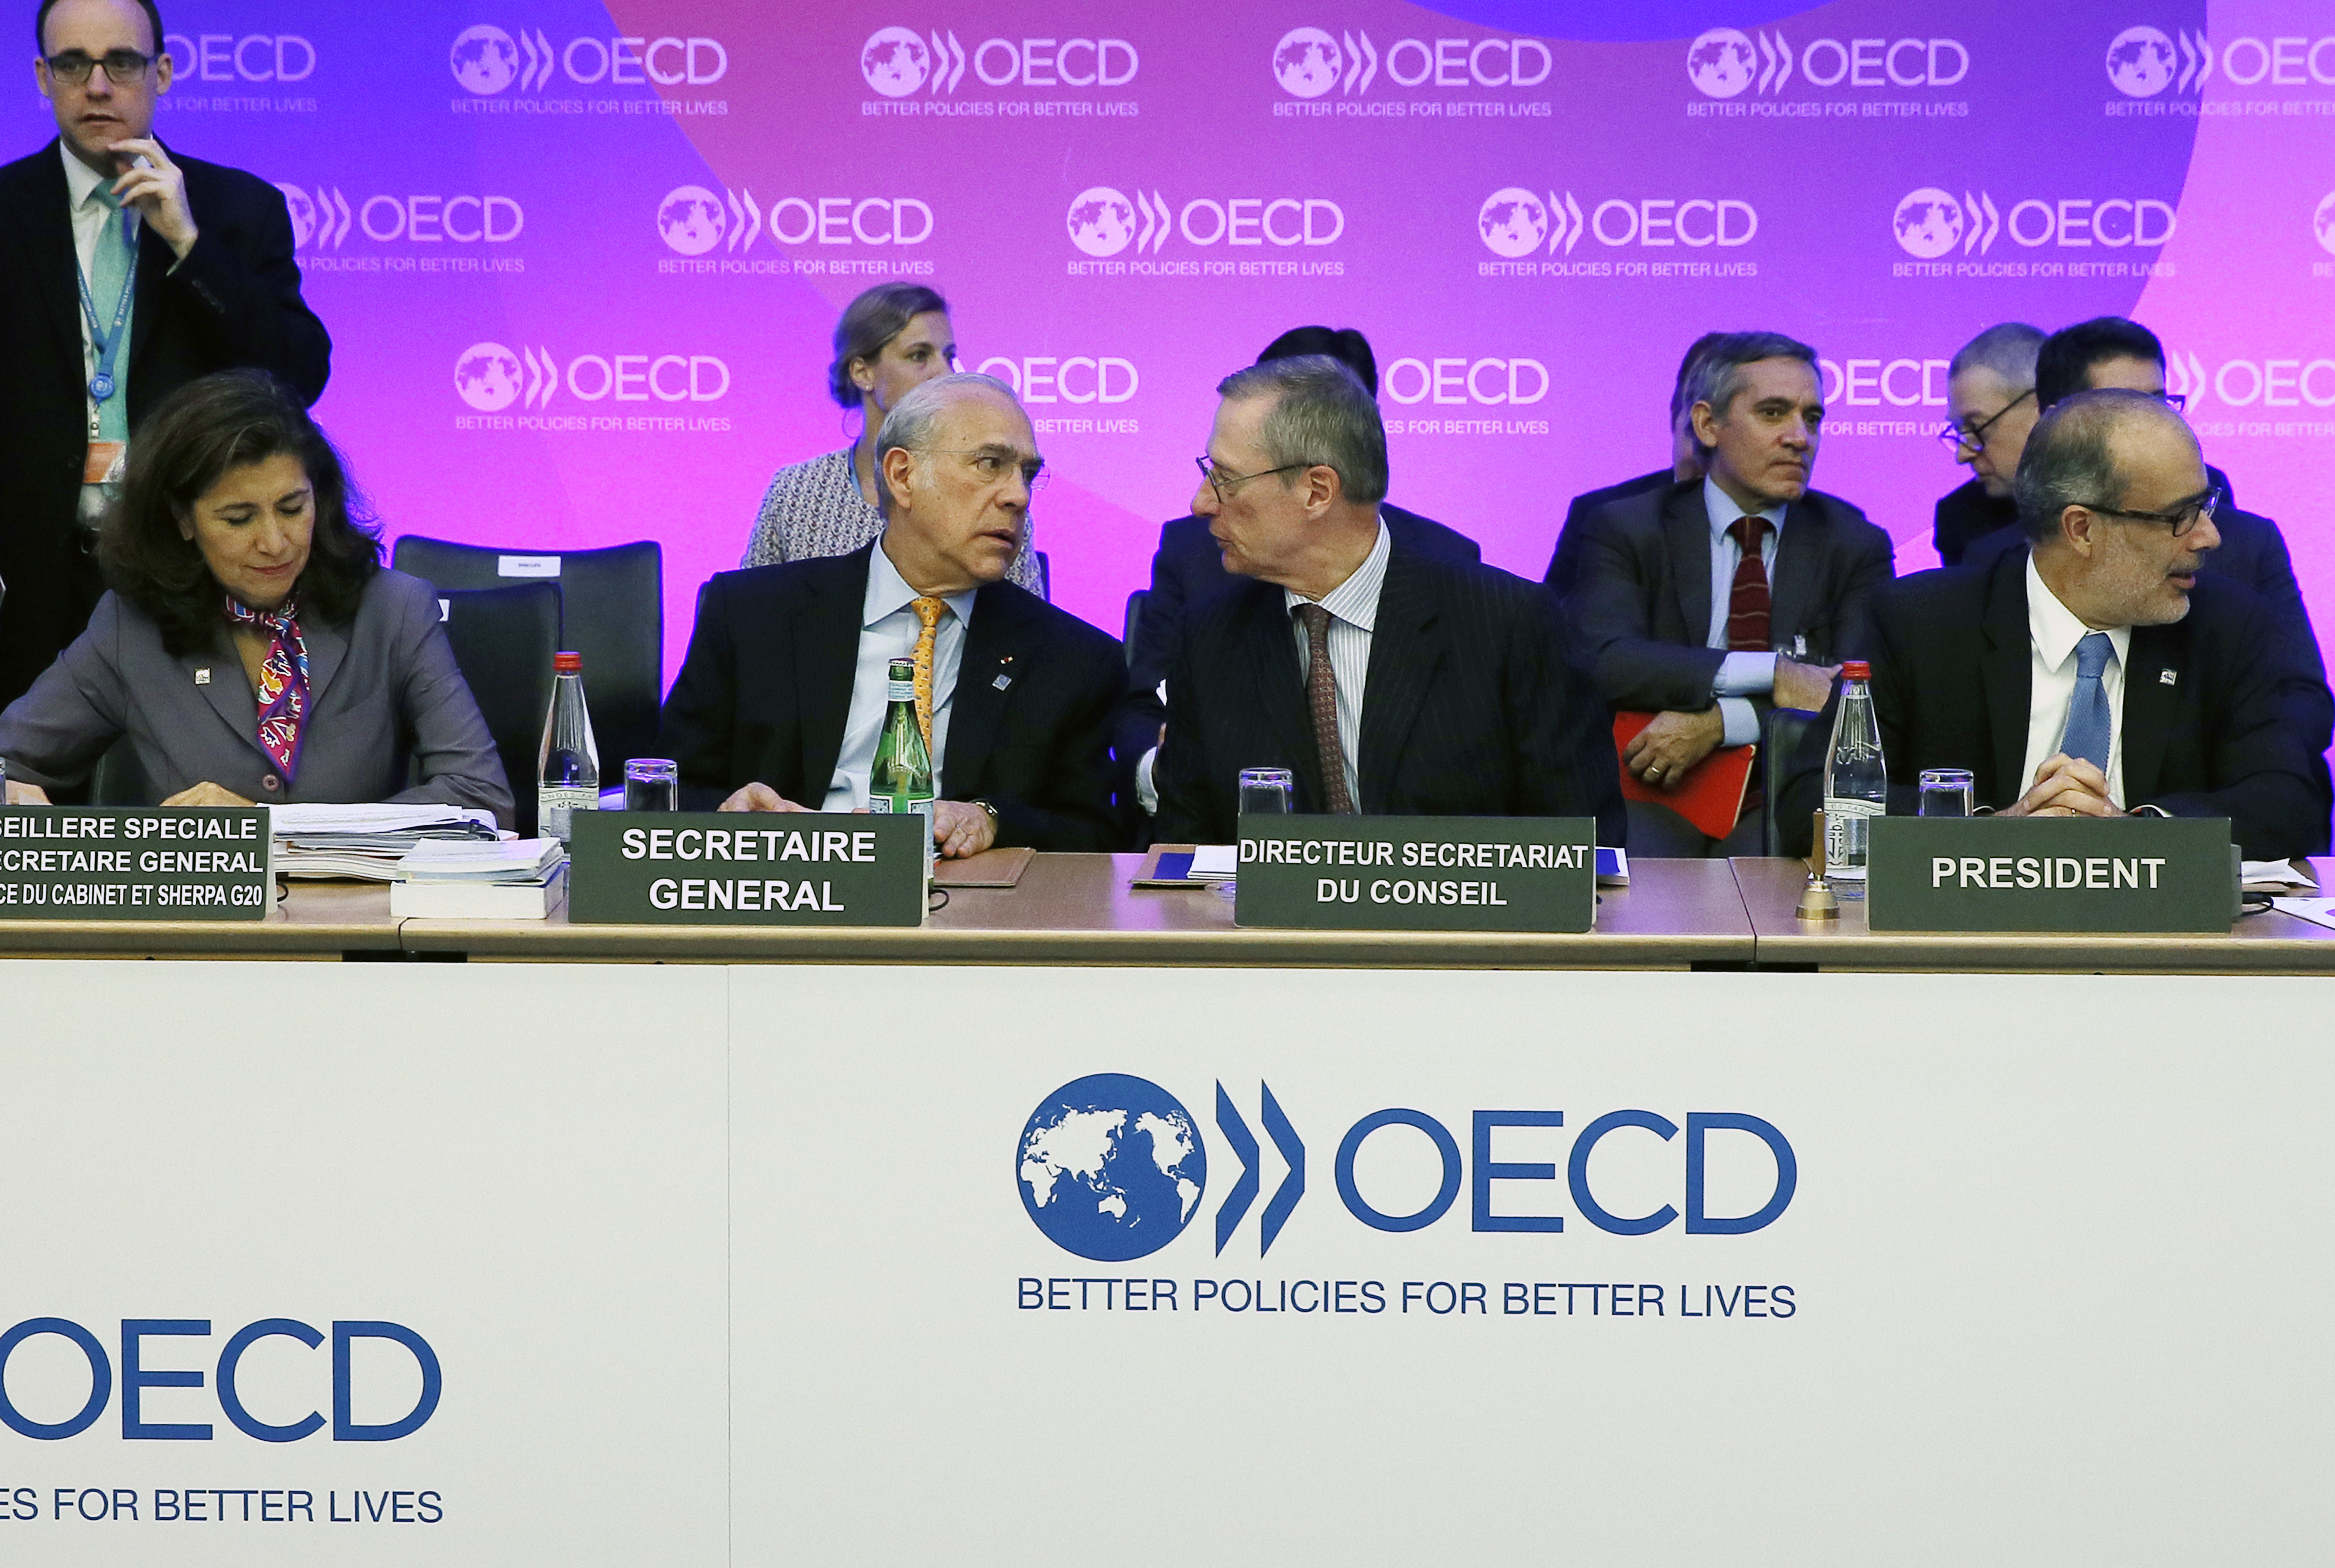 OUTLOOK. OECD Secretary-General Jose Angel Gurria (C-L) with other ministers and delegations during the meeting of the OECD in Paris, France on June 1, 2016. Photo by Etienne Laurent/EPA 